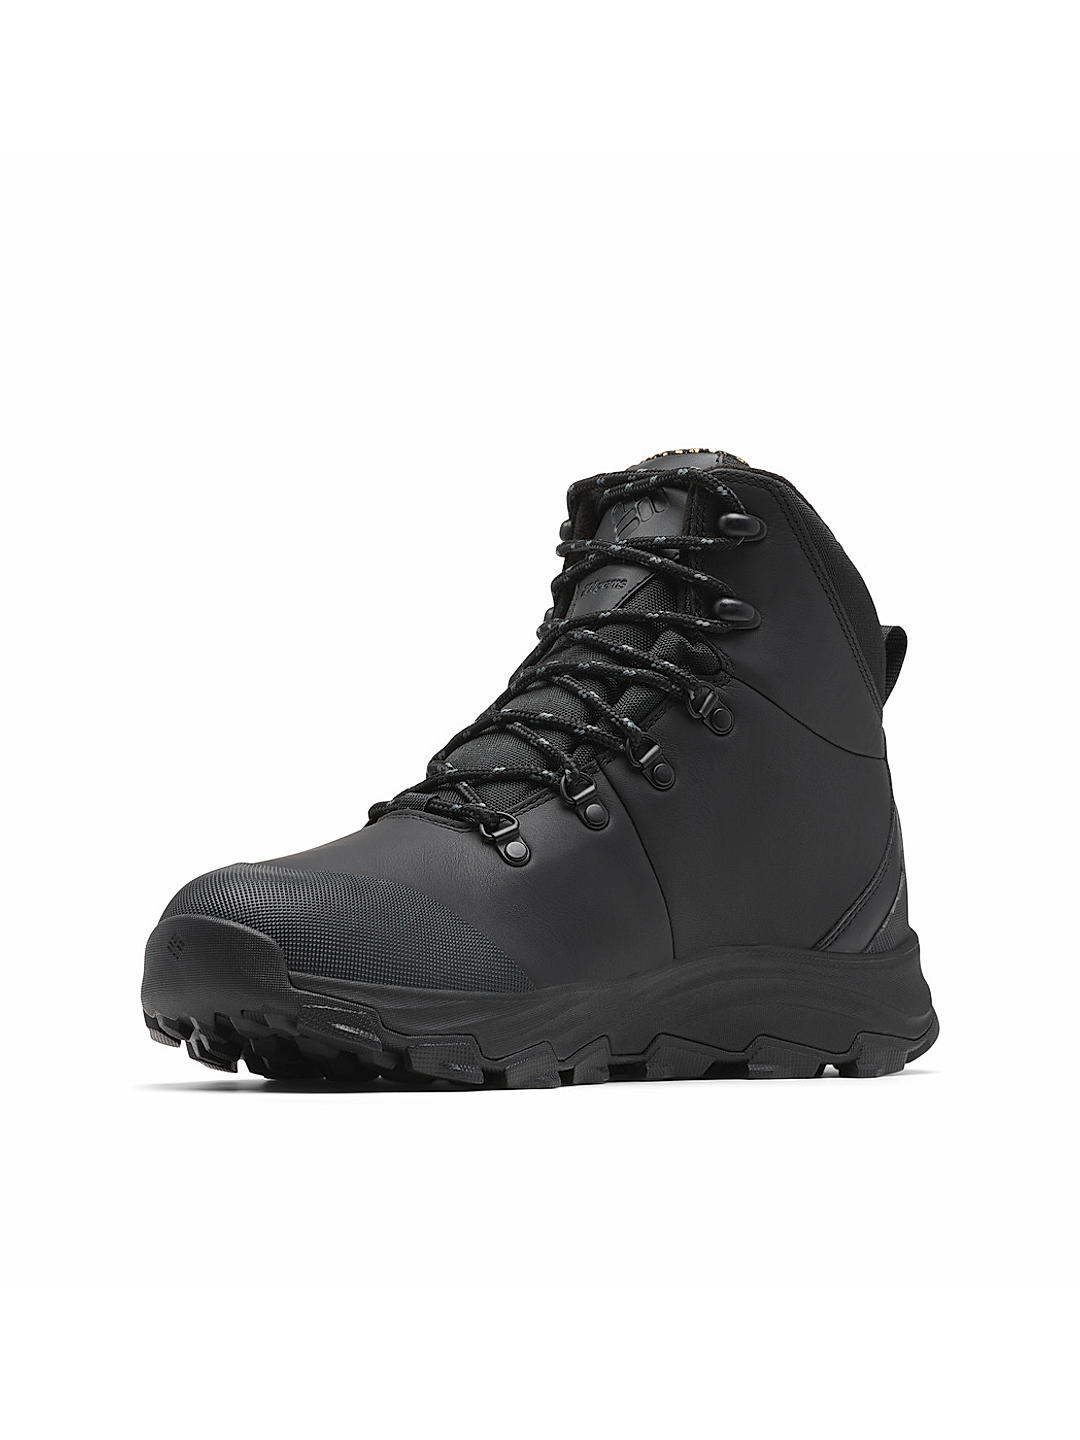 Buy Expeditionist Boot for Men Online at Columbia Sportswear | 488150